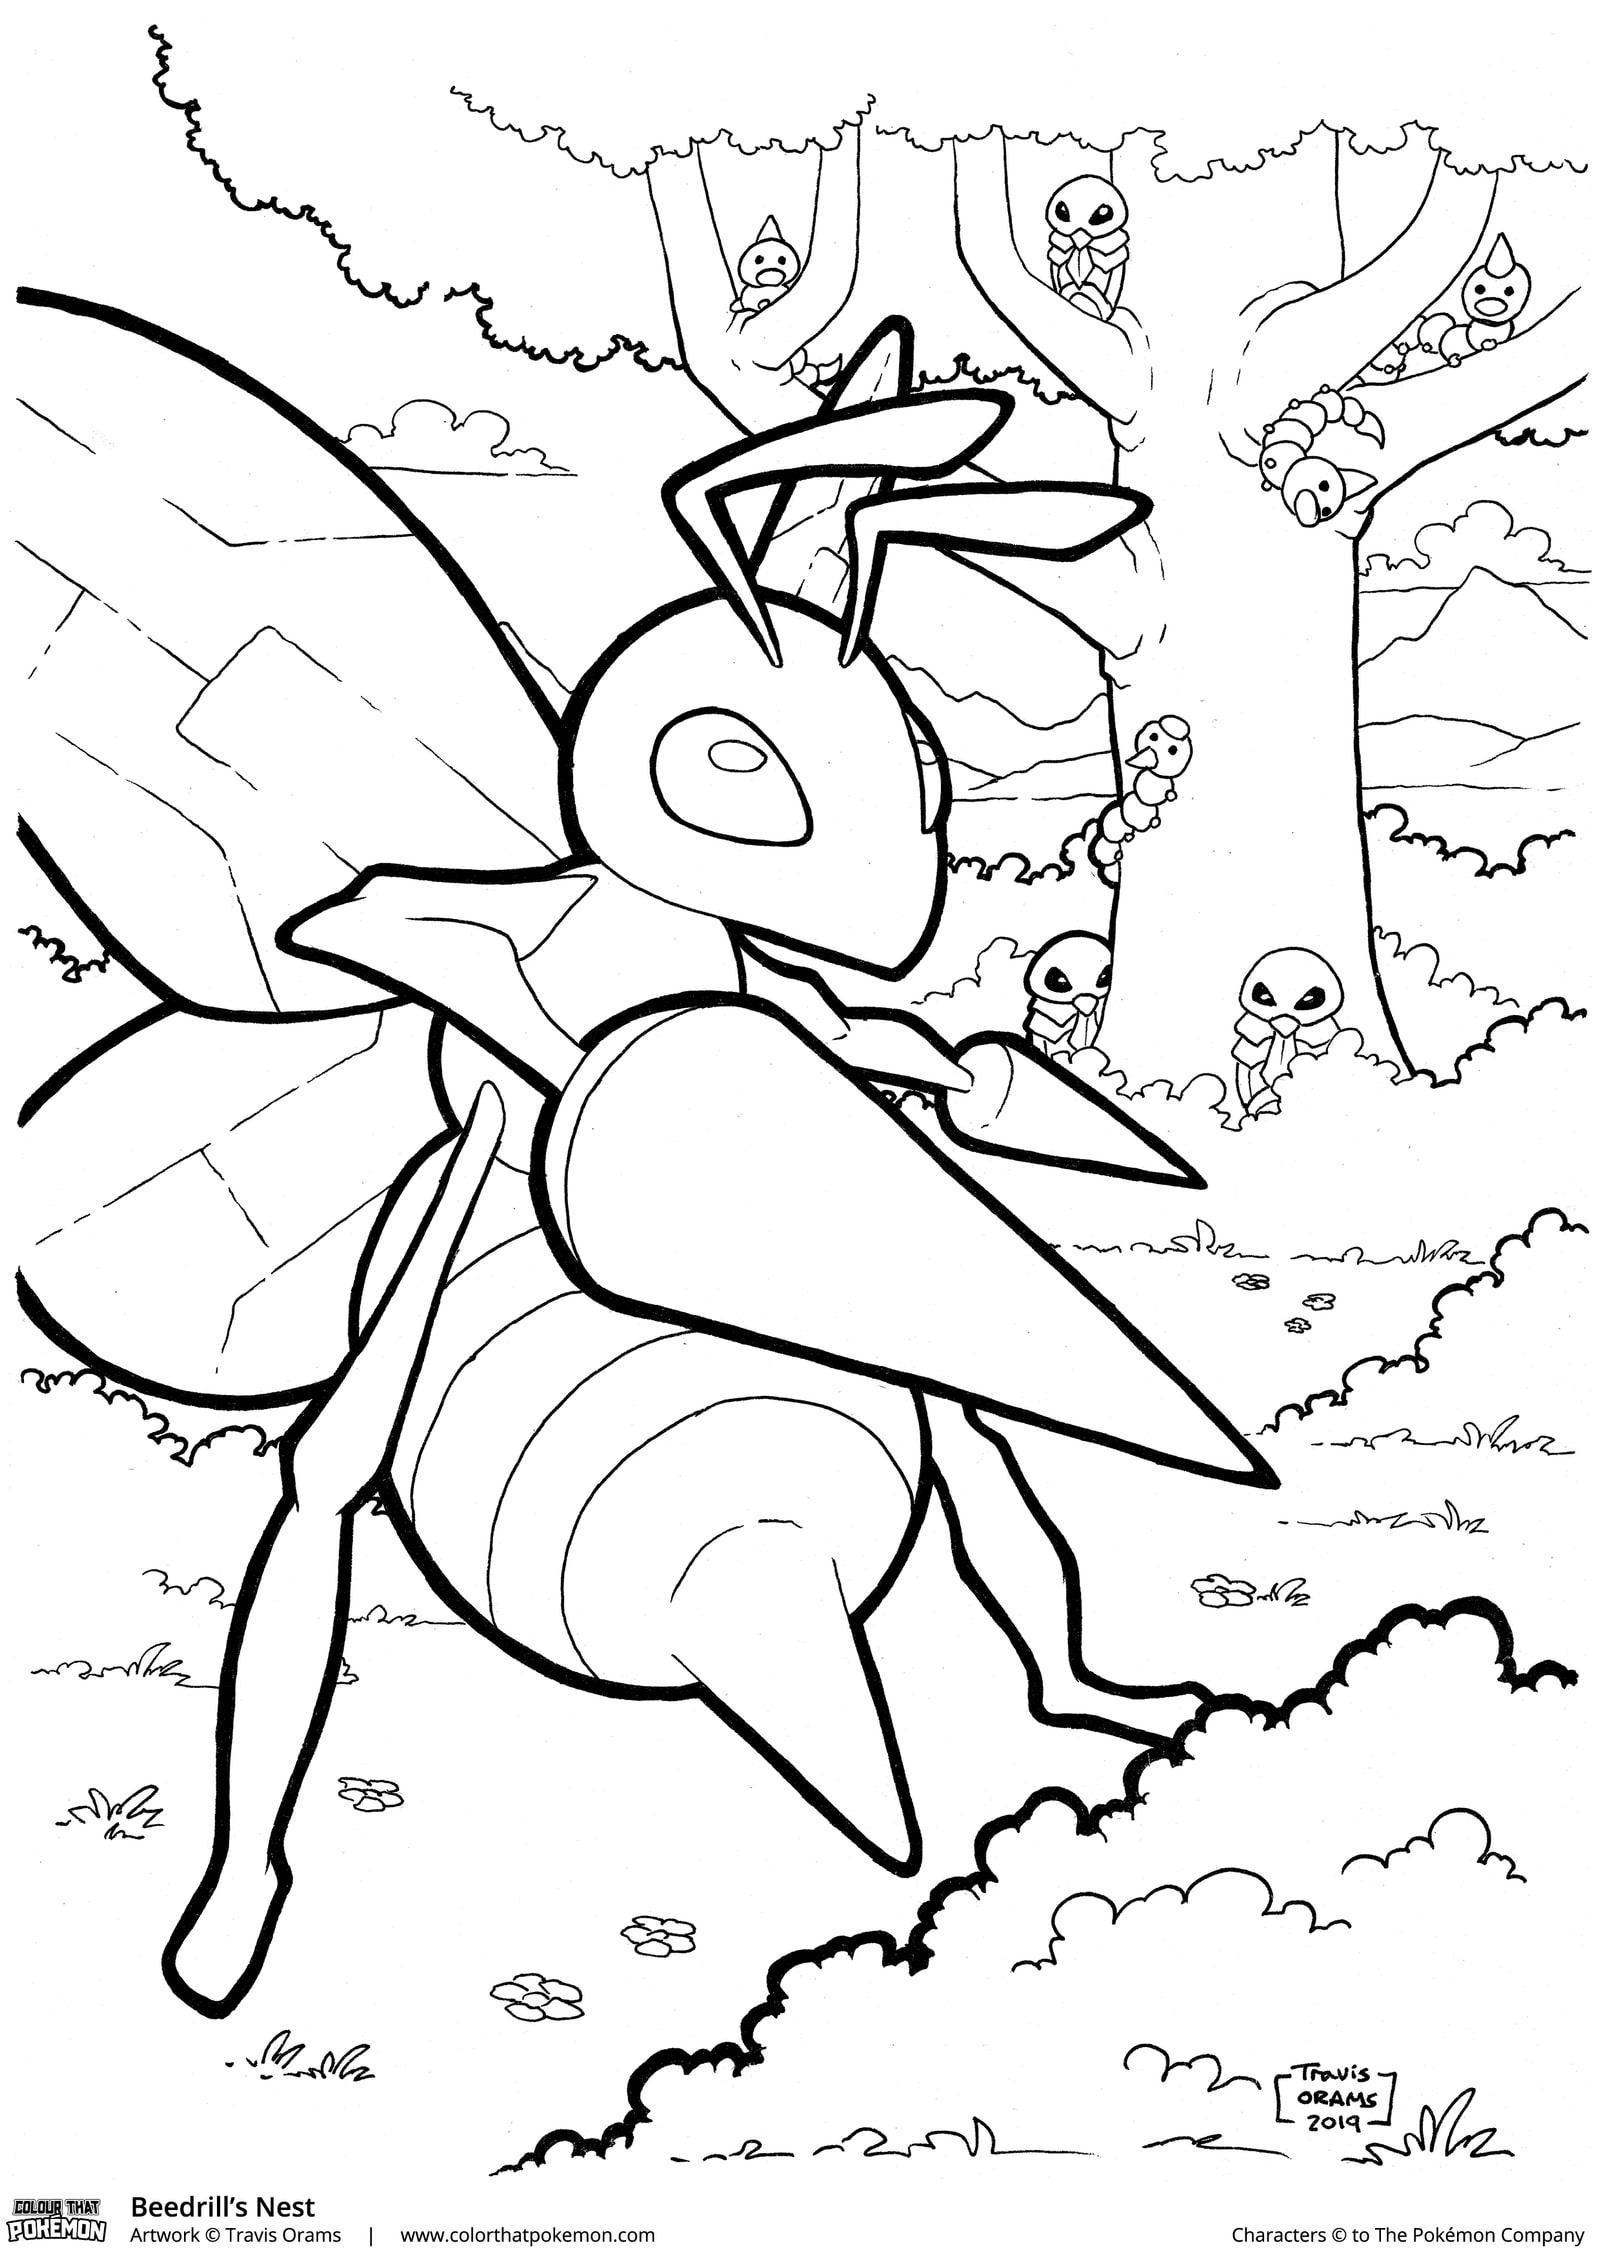 Beedrill 6 Coloring Page - Free Printable Coloring Pages for Kids